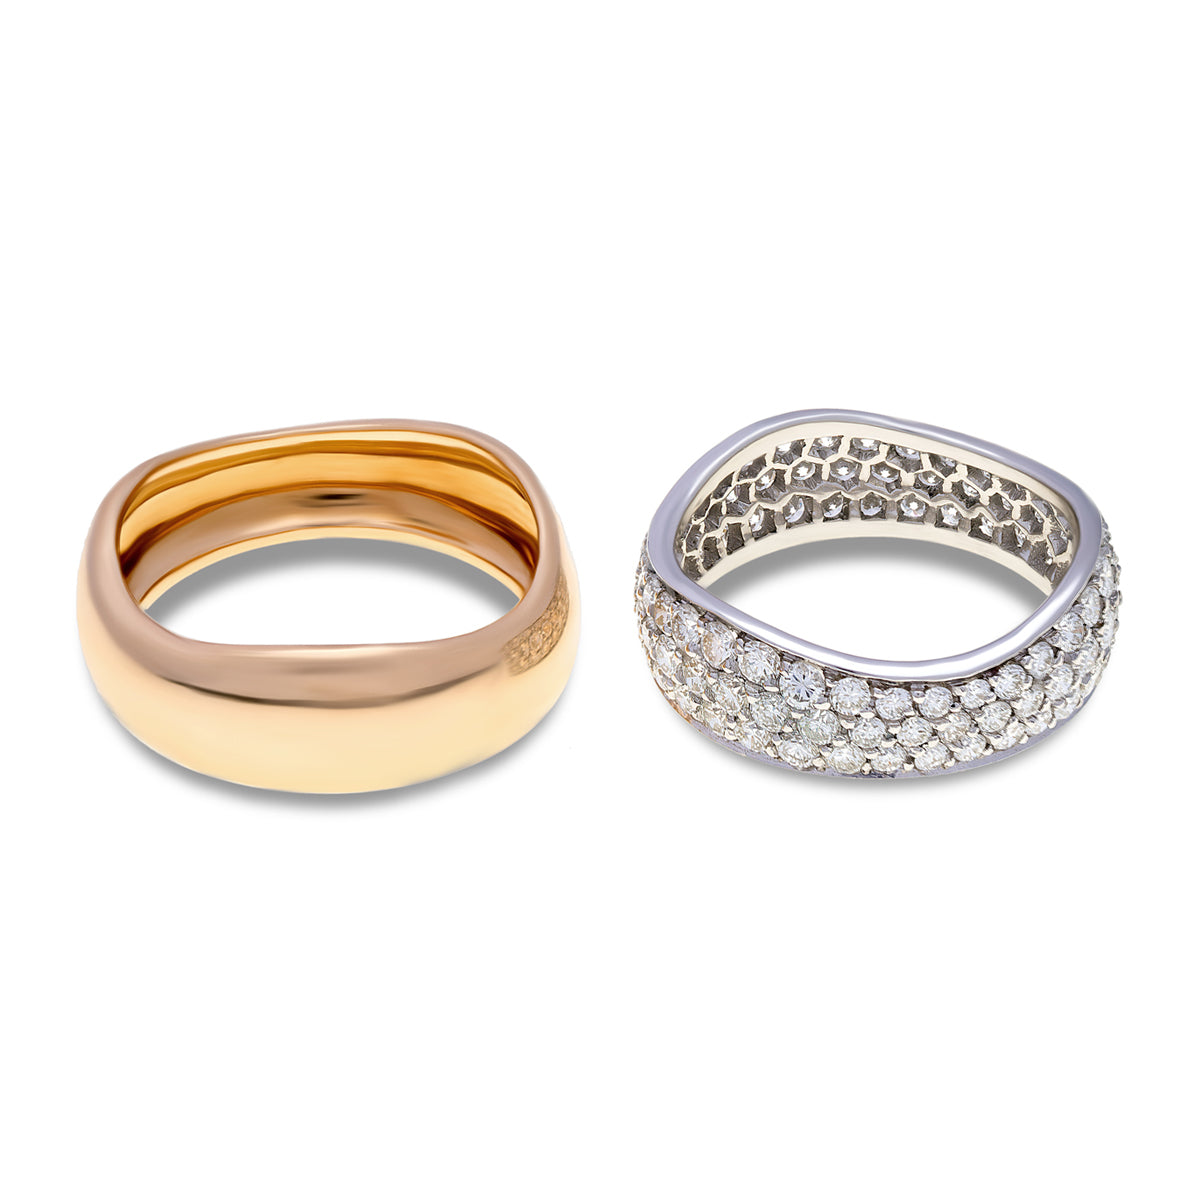 18ct Yellow gold and white gold Cartier Love Me ring set